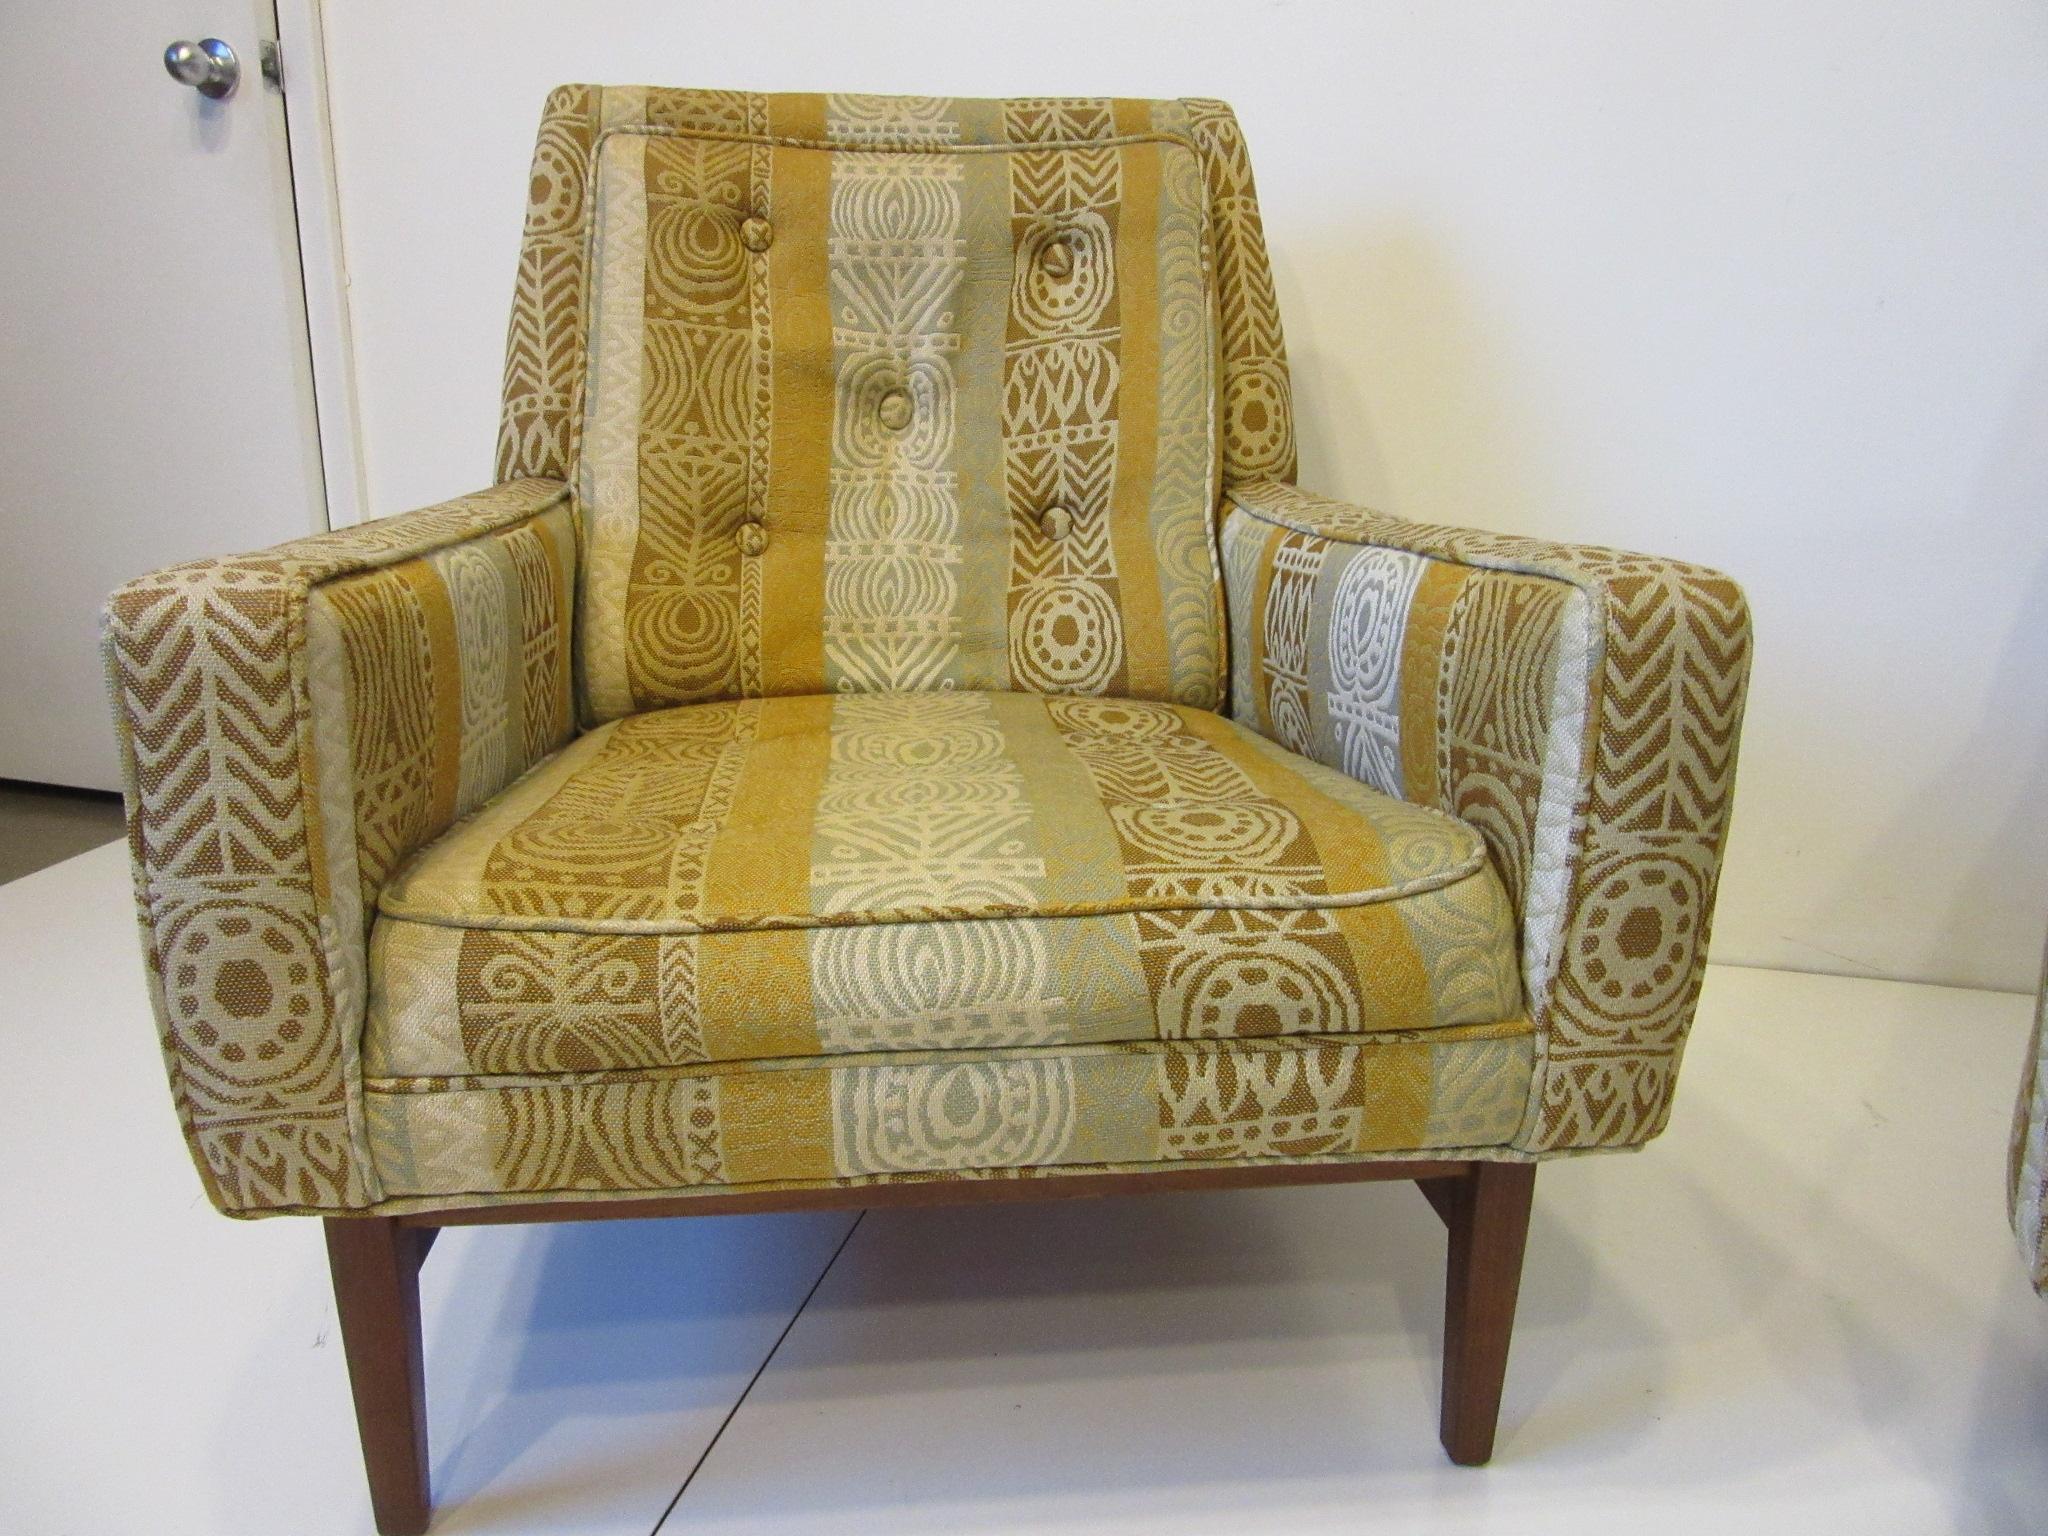 Upholstery Lounge Chairs in the Style of Harvey Probber or Midcentury